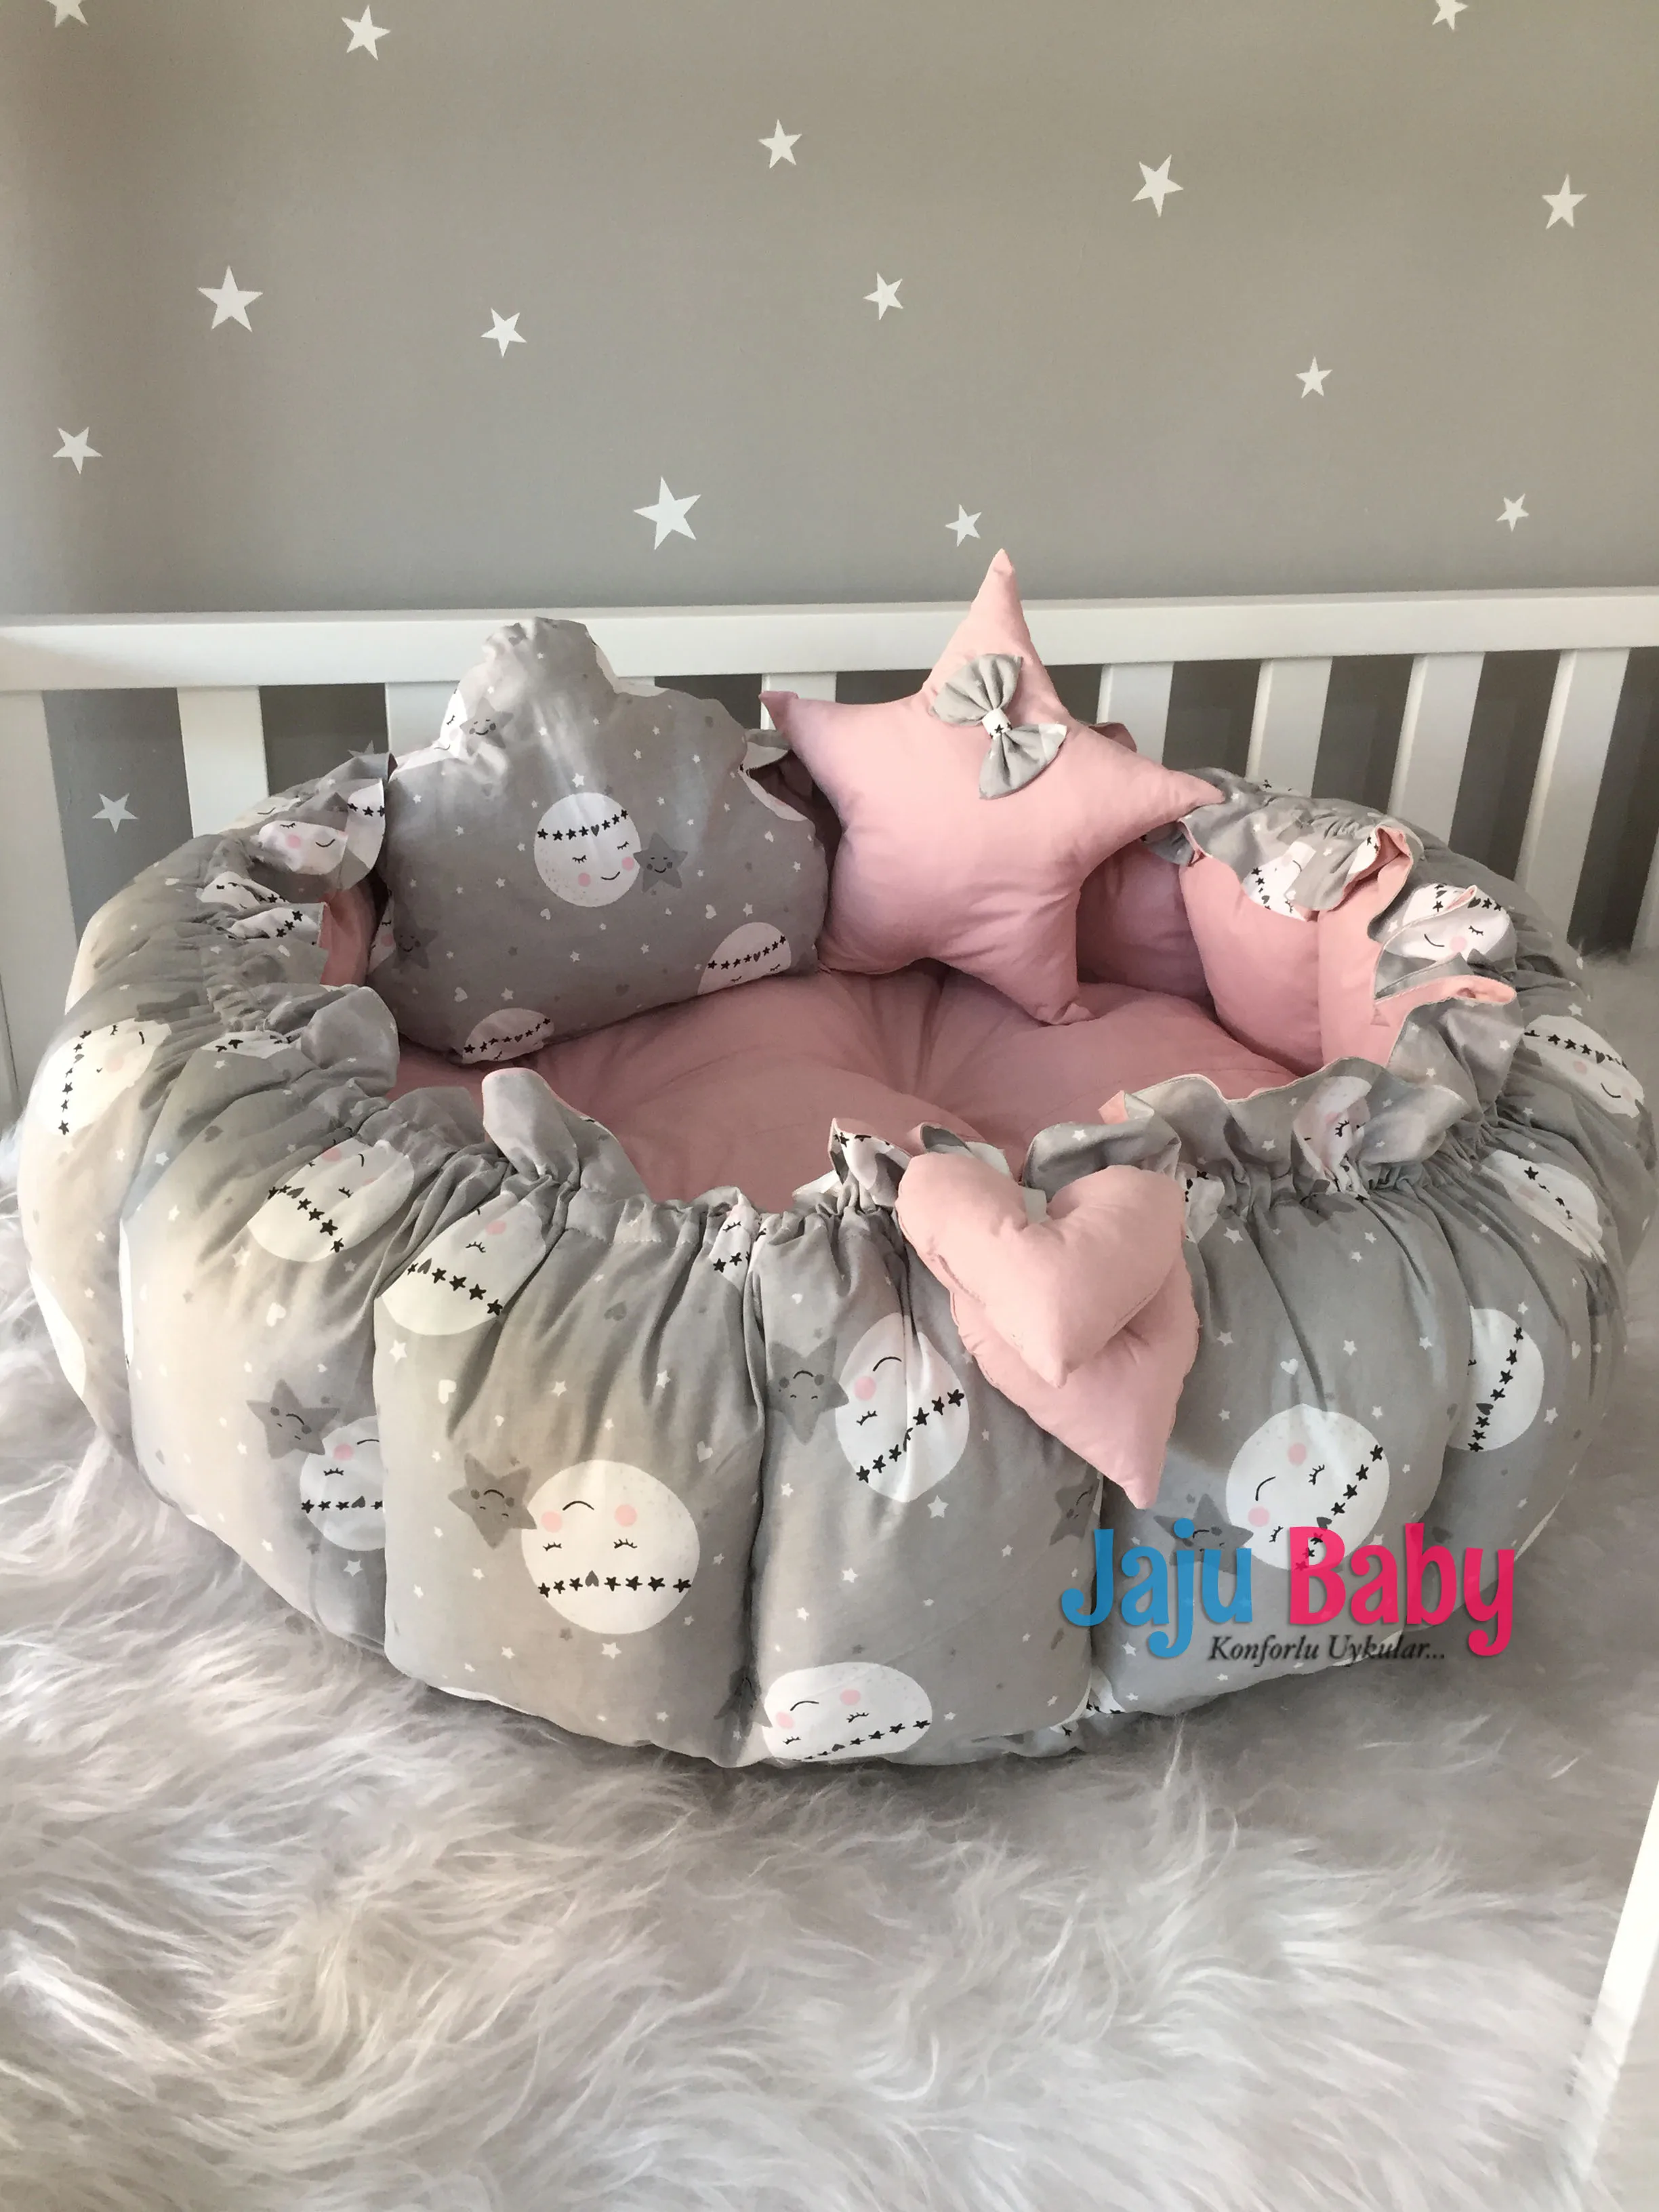 Jaju Baby Handmade Gray Full Moon Patterned Design Luxury Play Mat Babynest Maternal Bed Double-sided Use Baby Activity Portable